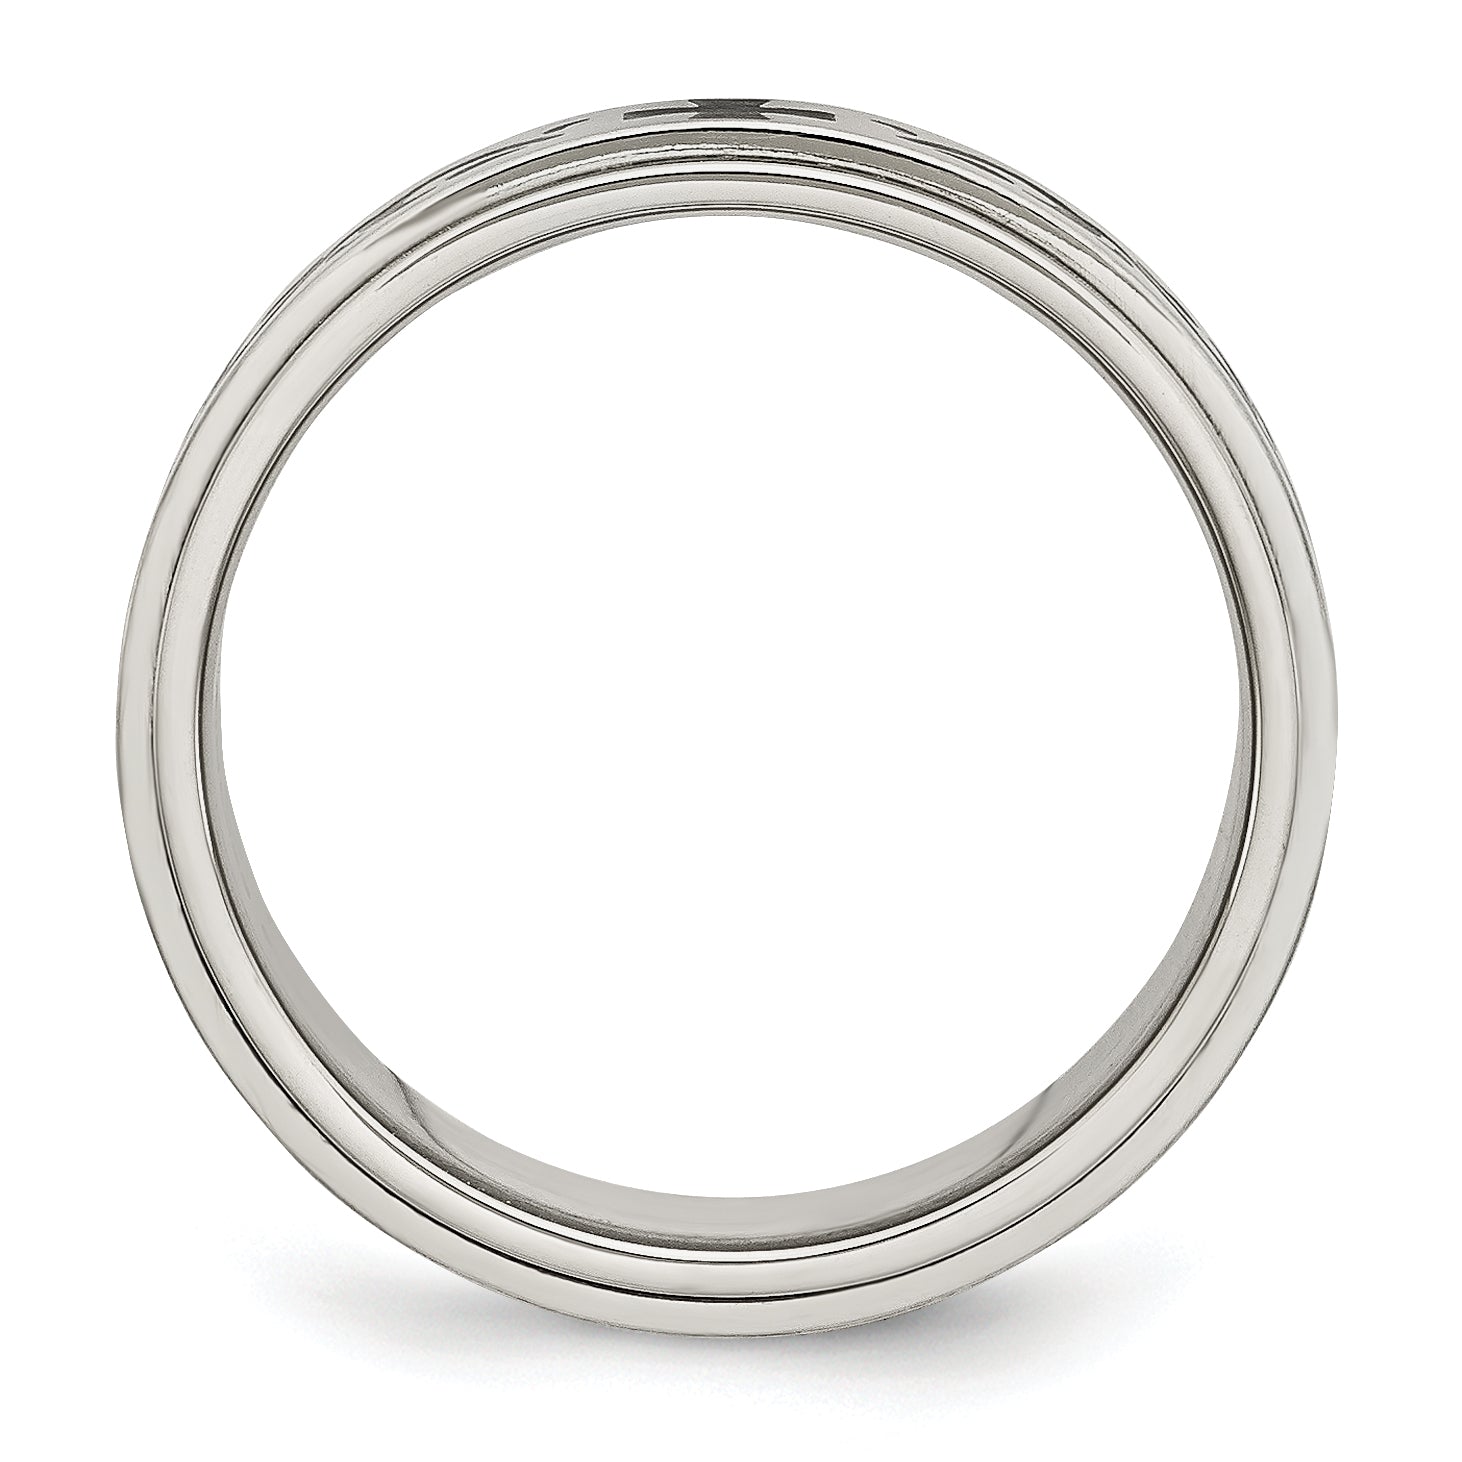 Stainless Steel Brushed and Polished Enamel Rotating Swirl Design 8mm Band